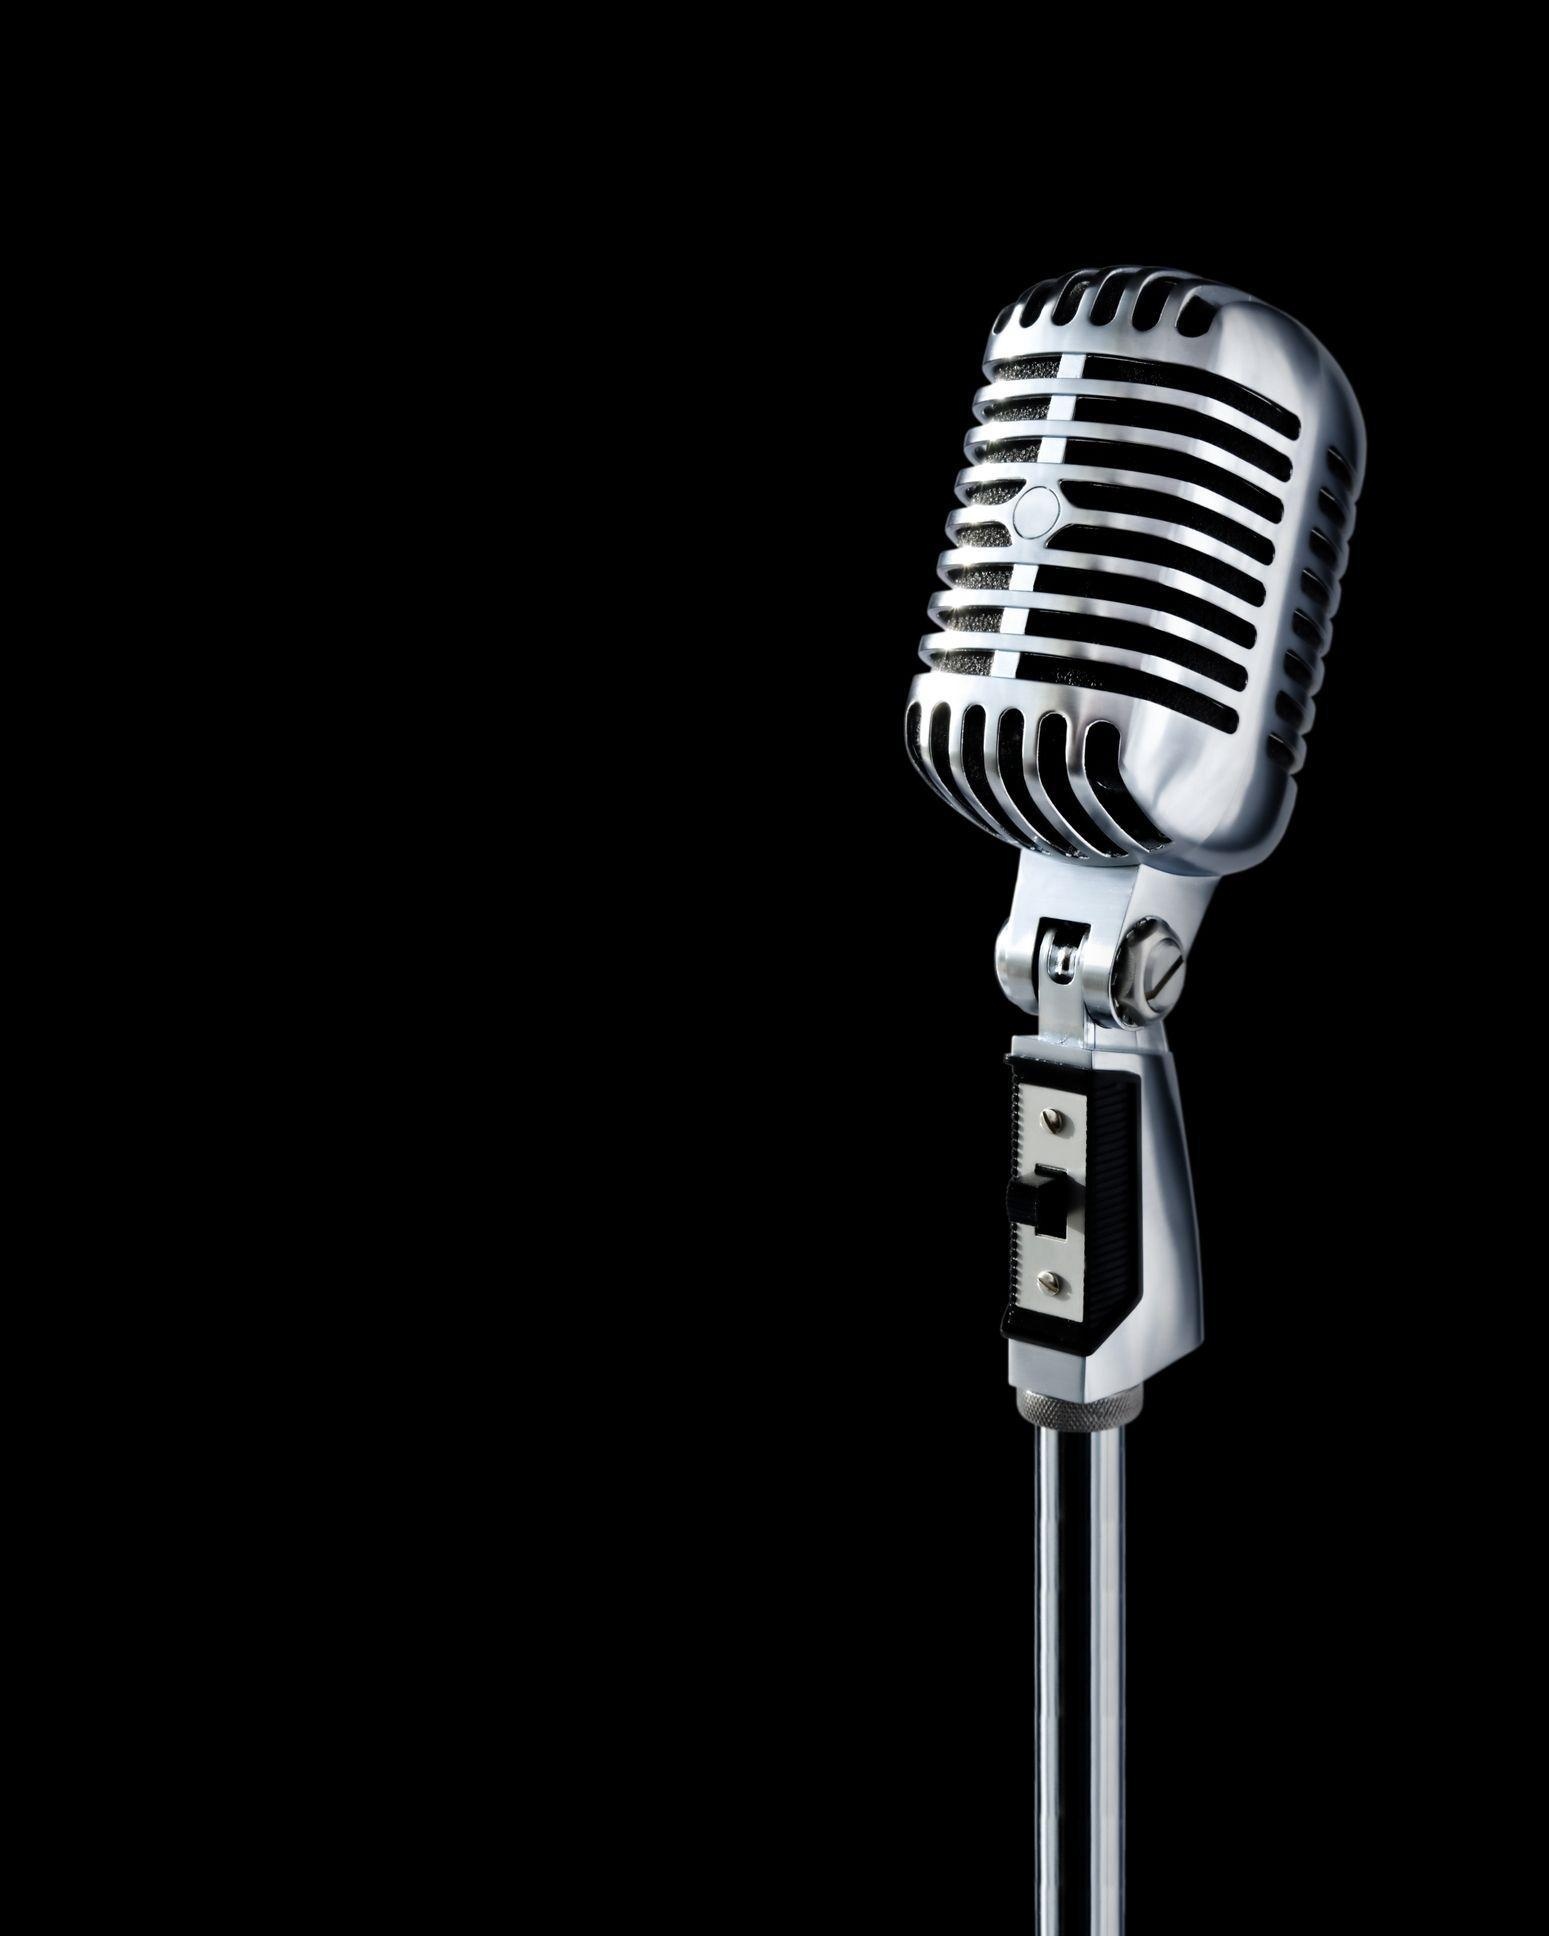 Microphone wallpapers, Music, Technology, Entertainment, 1550x1940 HD Handy